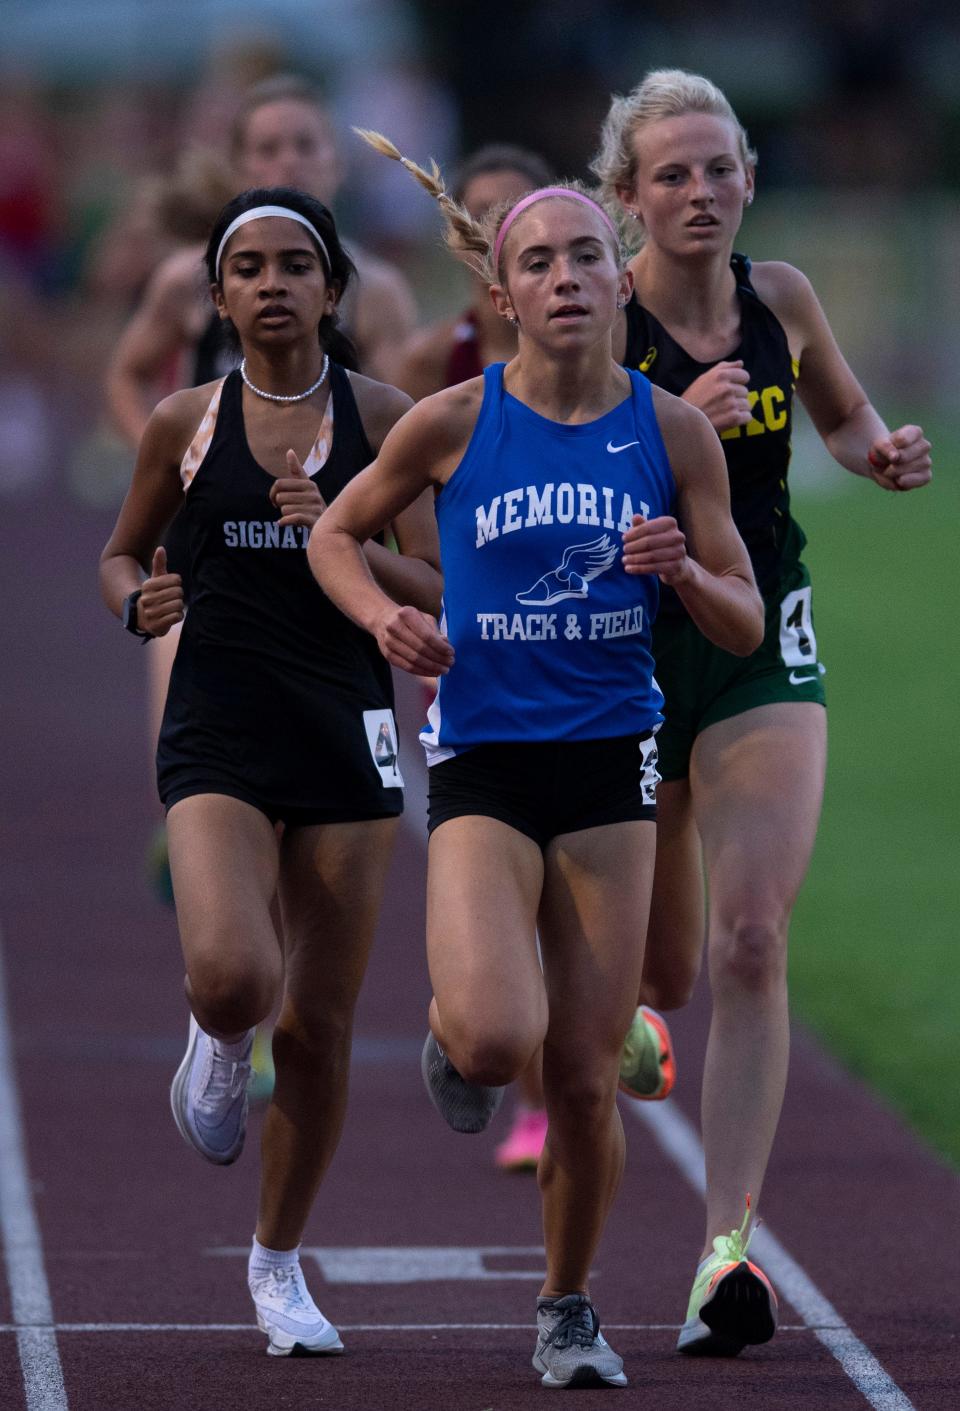 Memorial's Jacqueline Brasseale, center, competes in the 3200 Meter Run during the IHSAA Girls Track & Field Regionals at the Central High School's Central Stadium Tuesday evening, May 24, 2022. Brasseale finished in third place with a time of 11:33.15.